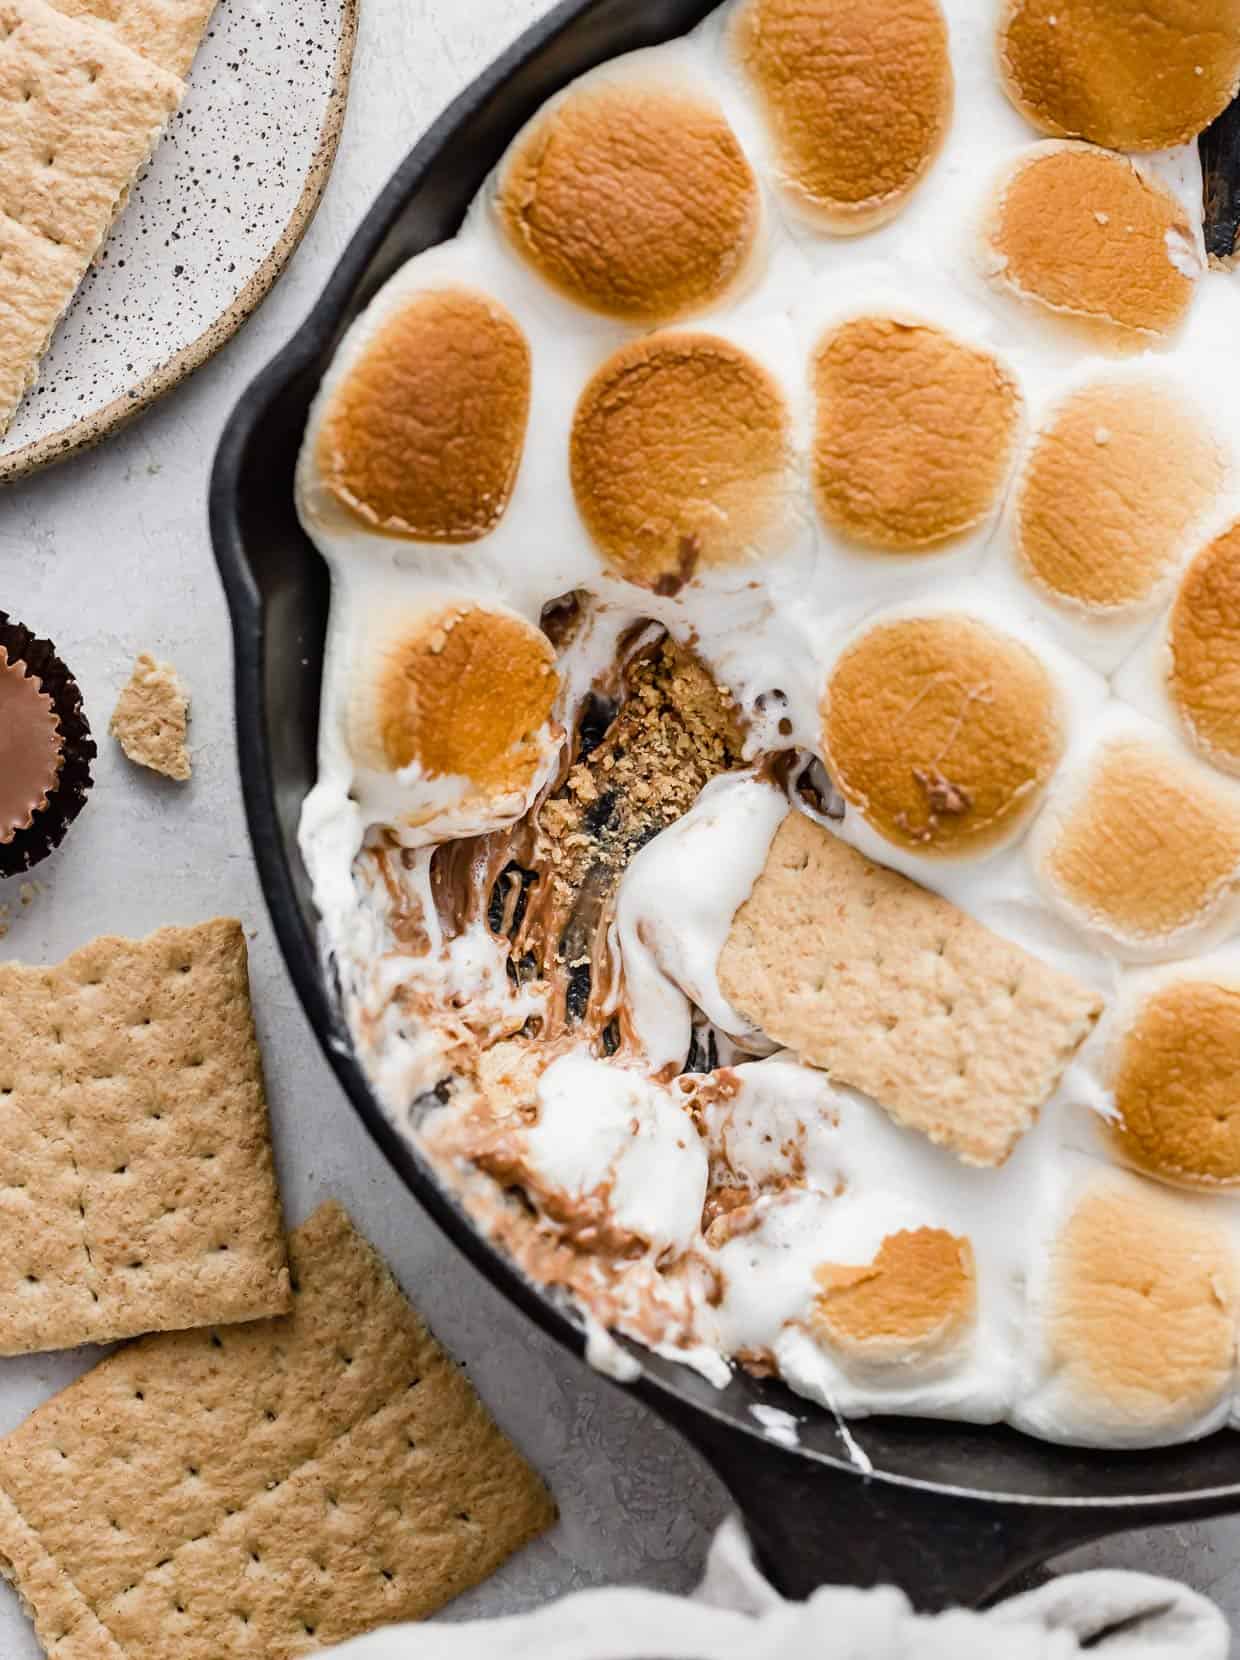 Reese's S'mores in a skillet with a graham cracker scooping into the marshmallows and peanut butter cups.